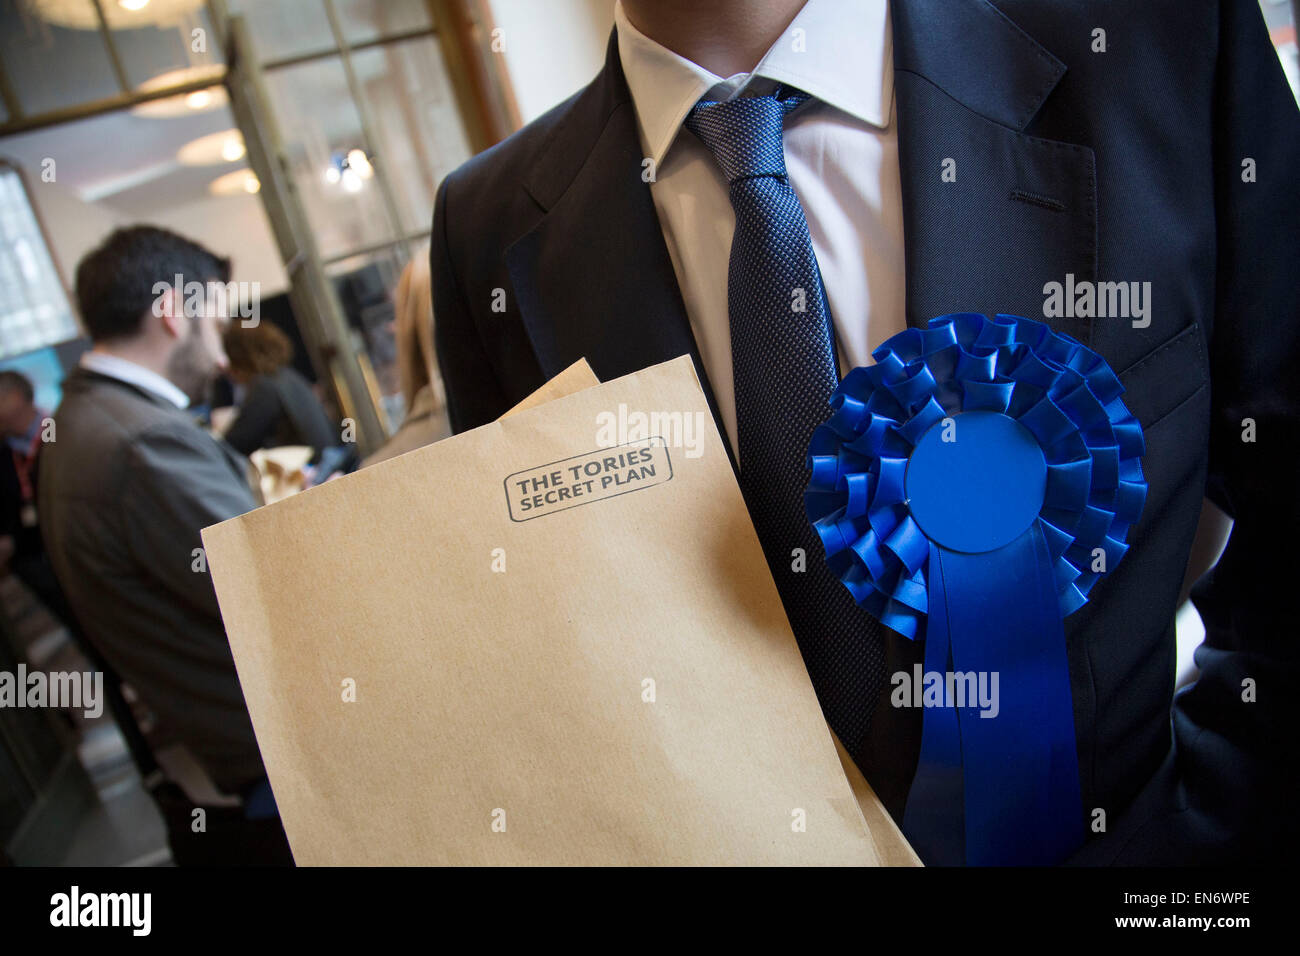 London, UK. Wednesday 29th April 2015. Labour Party member and supporter with a fake Tory dossier at a General Election 2015 campaign event on the Tory threat to family finances, entitled: The Tories’ Secret Plan. Held at the Royal Institute of British Architects. Credit:  Michael Kemp/Alamy Live News Stock Photo